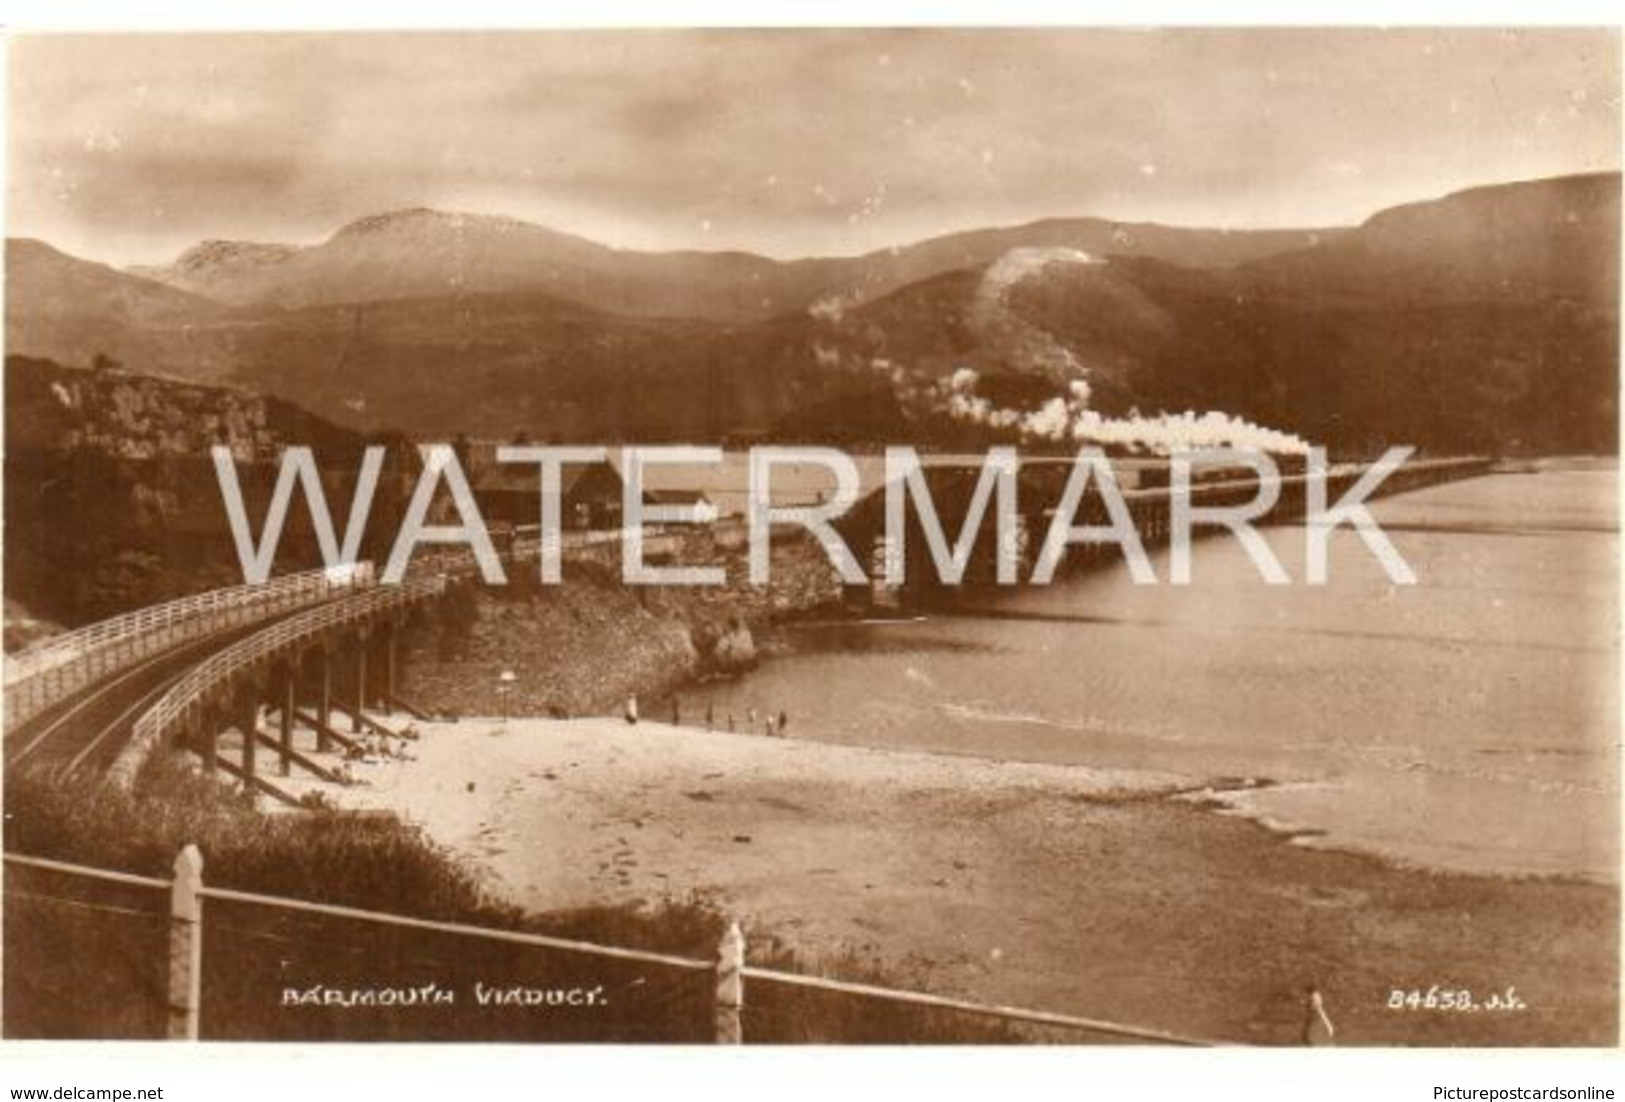 BARMOUTH VIADUCT OLD R/P POSTCARD WALES - Merionethshire